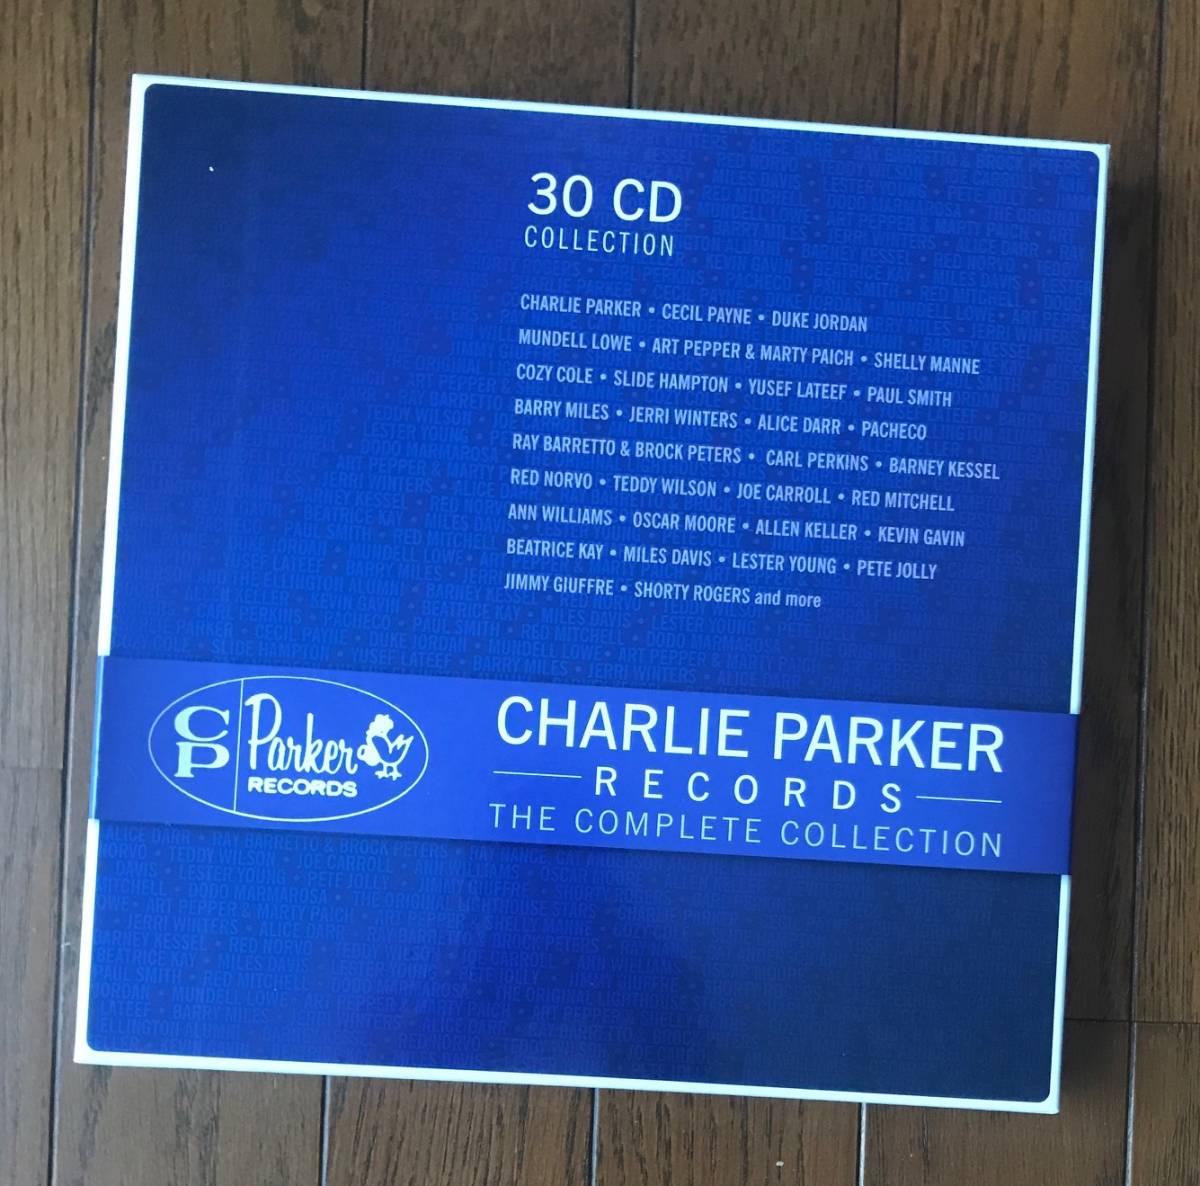 30 CD / CHARLIE PARKER / Charlie Parker Records: The Complete Collection / 紙ジャケ / 24Pブックレット / ほぼ新品 / 廃盤